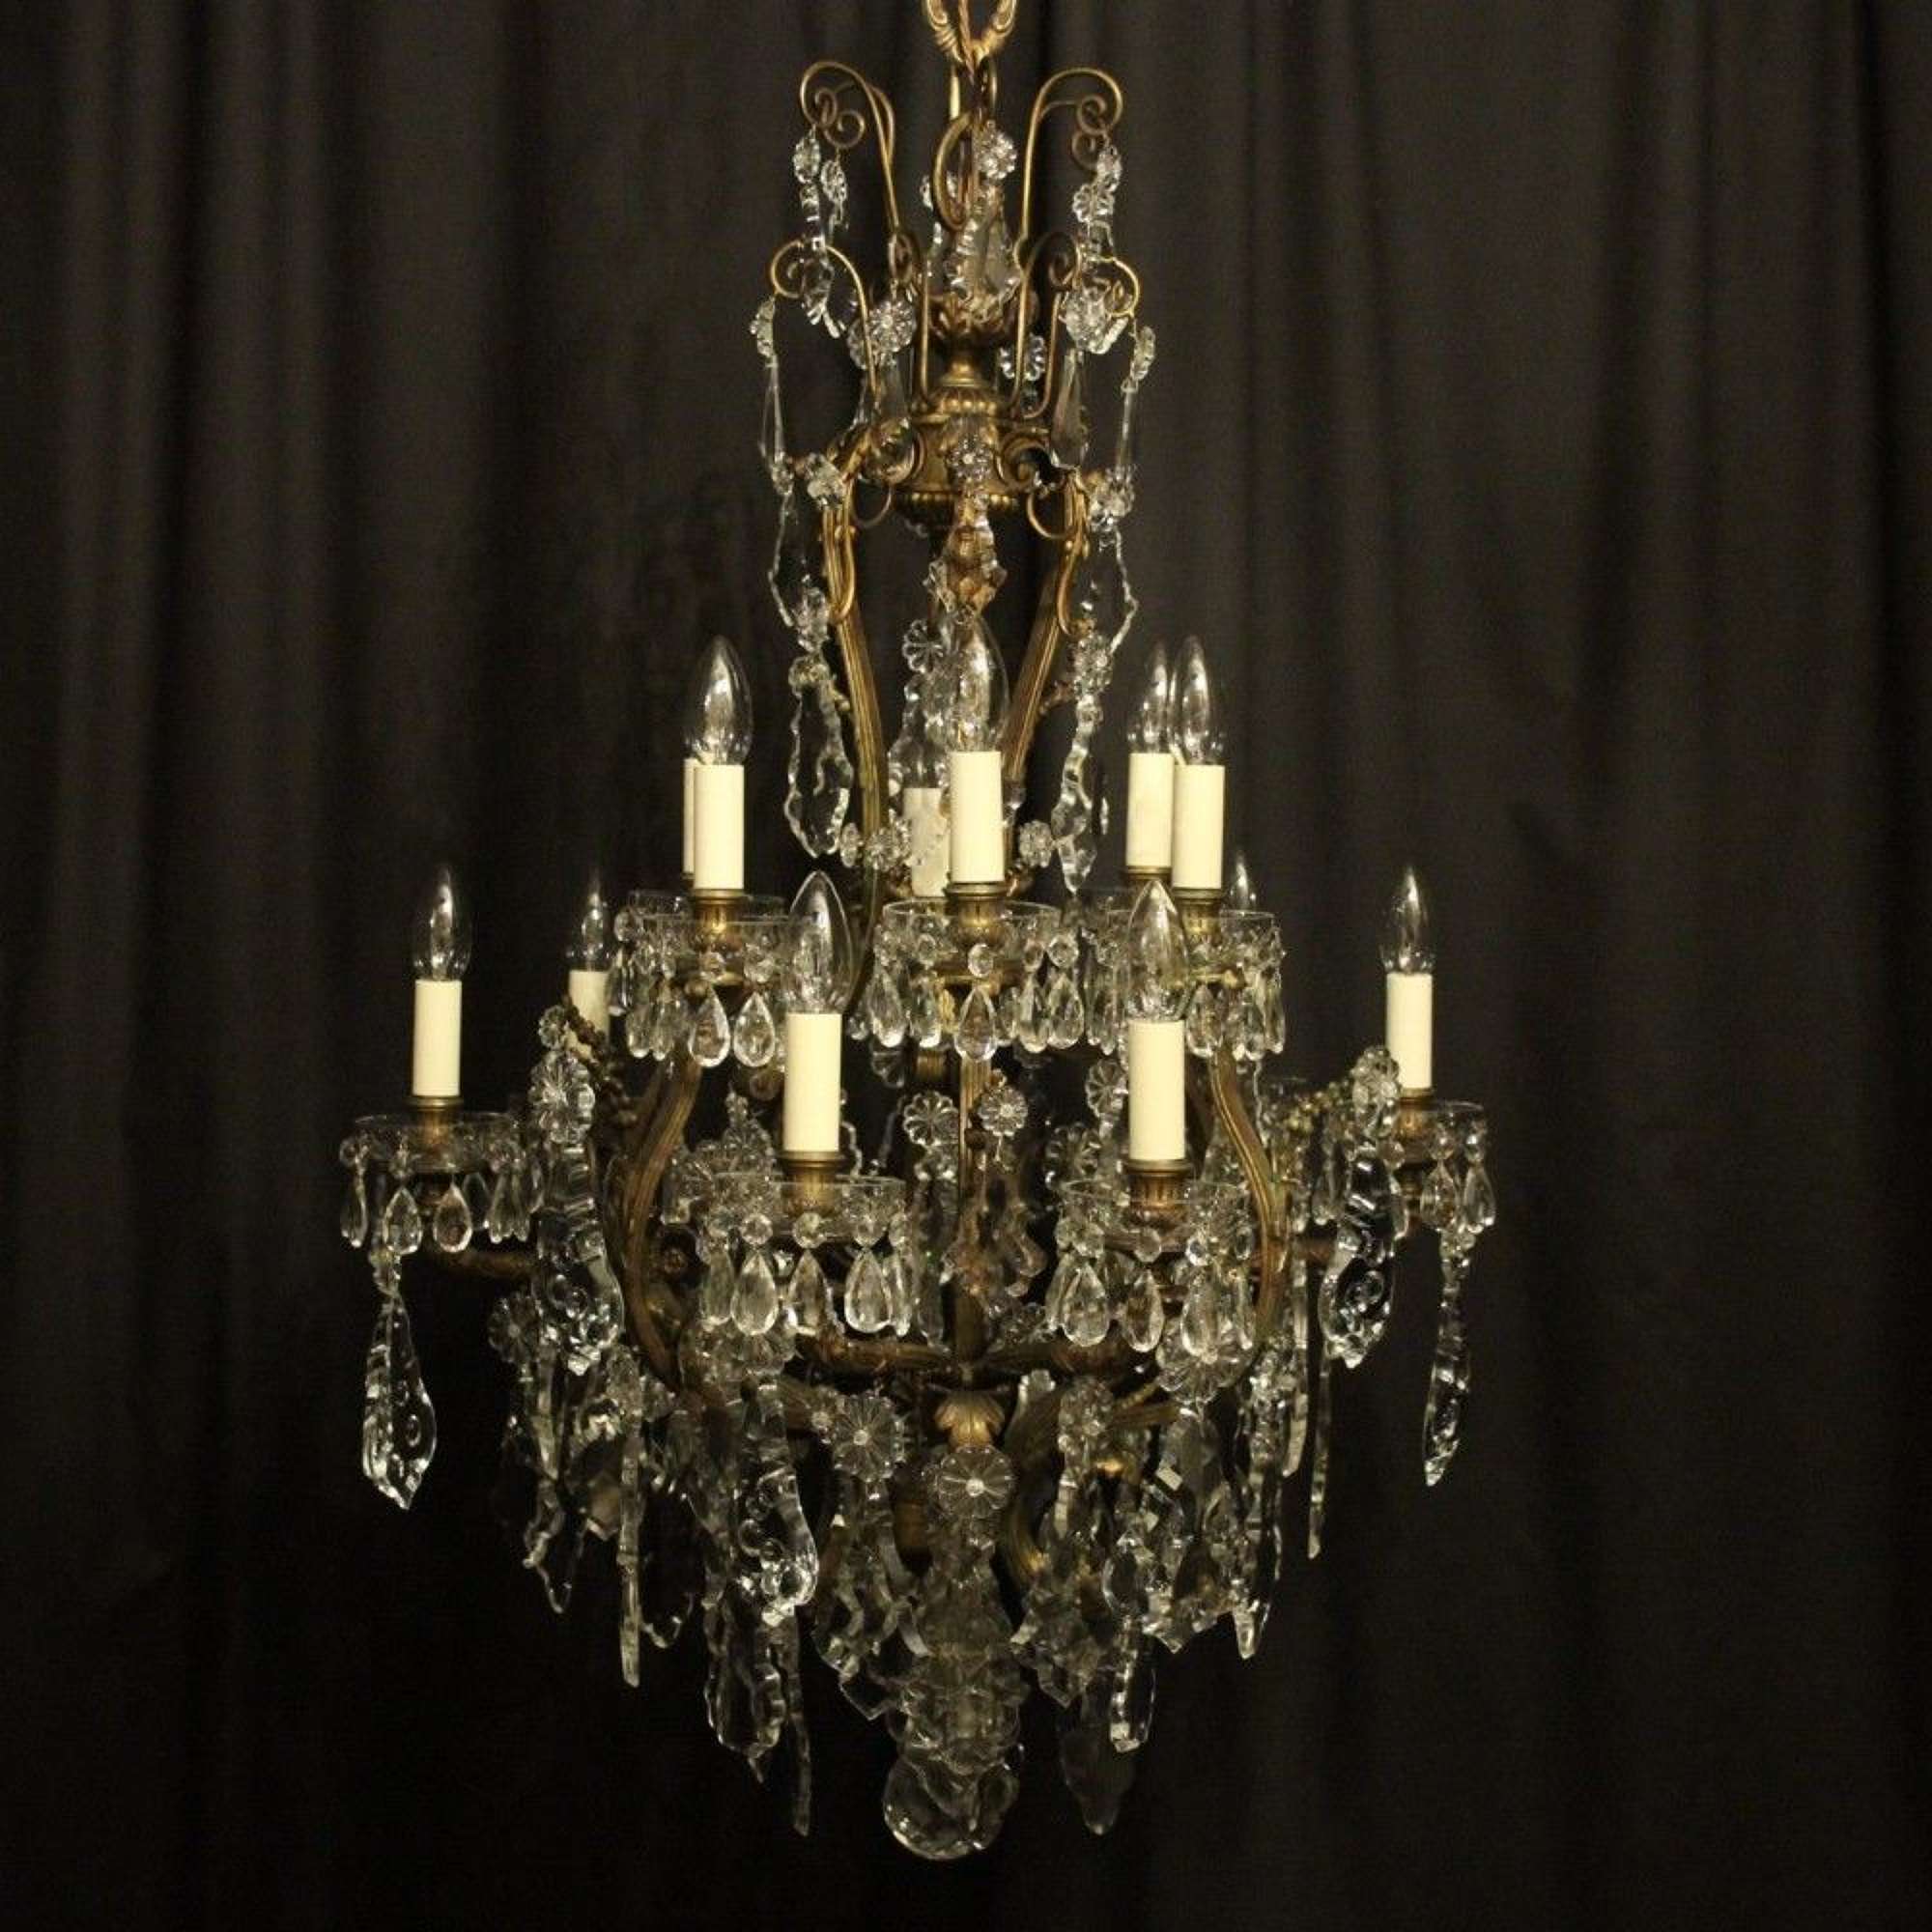 French 19th Century Gilded Bronze & Crystal 12 Light Antique Chandelie